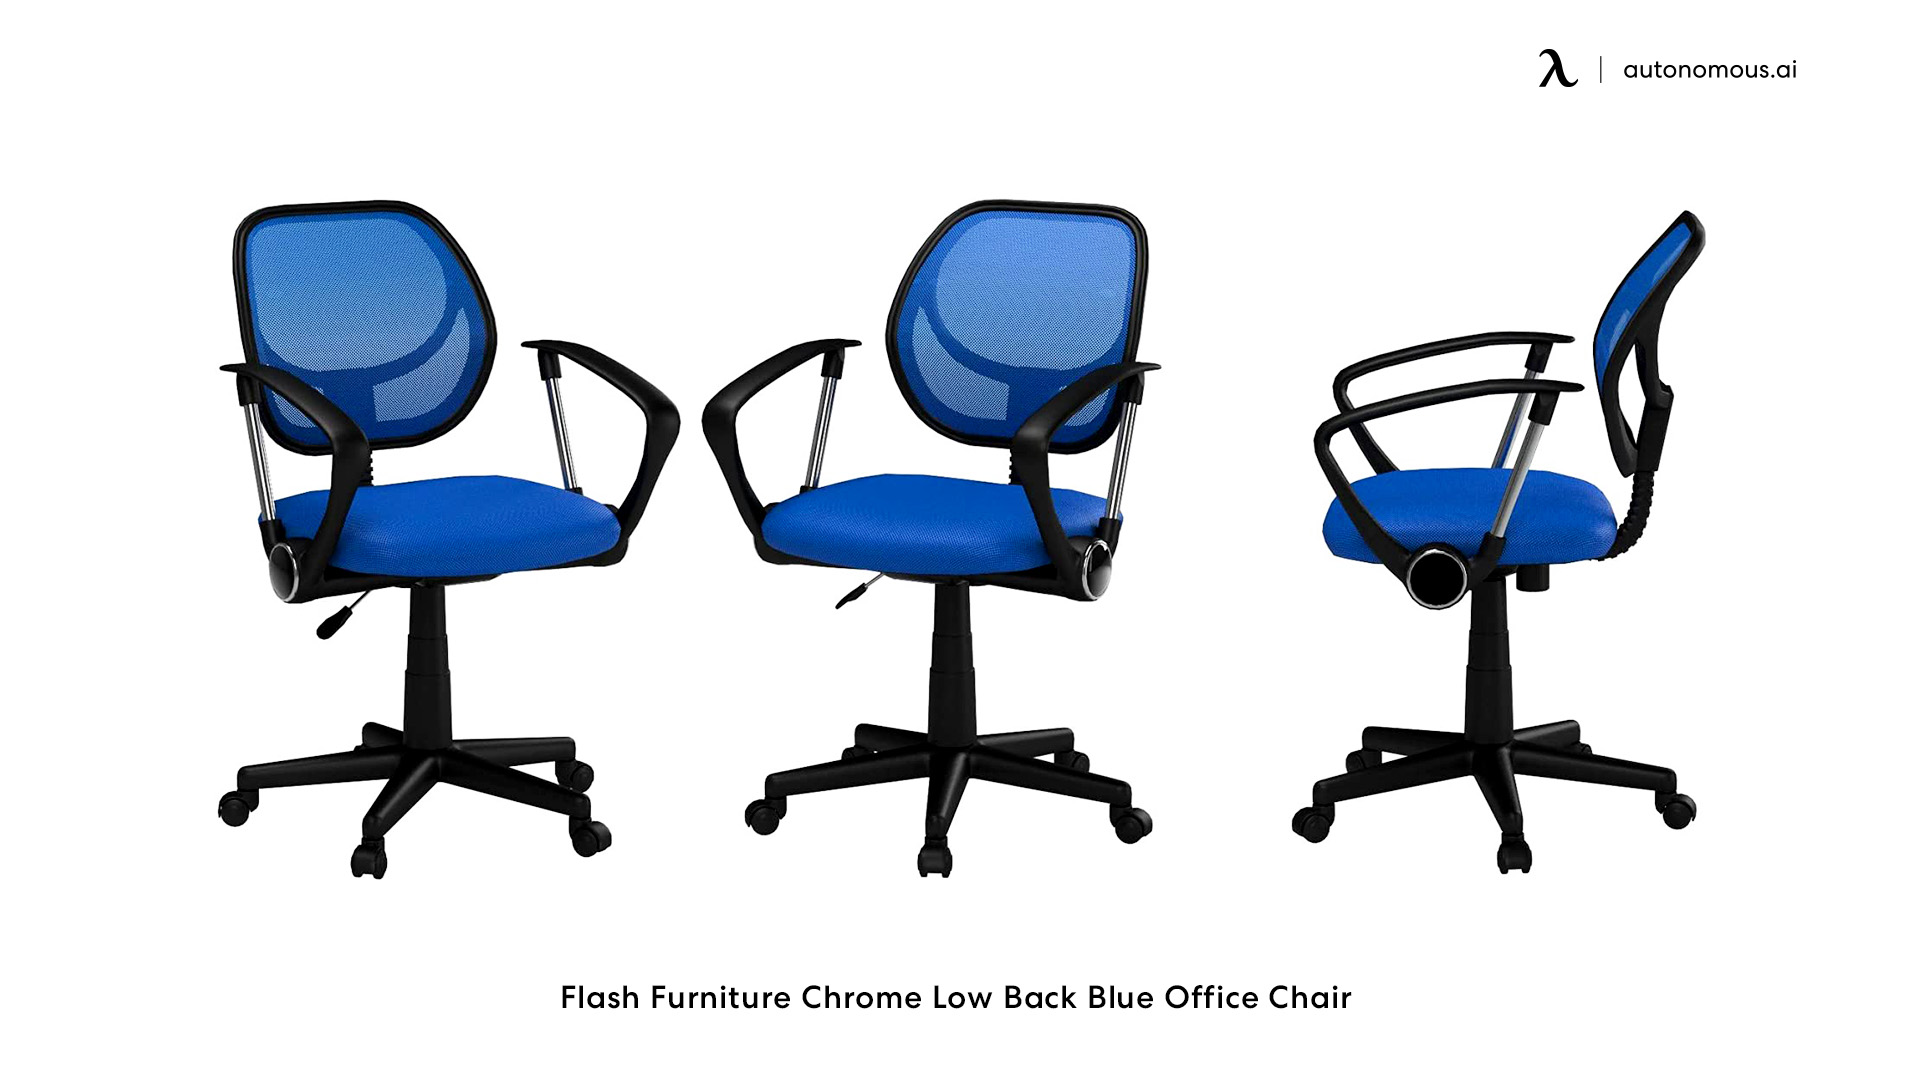 Flash Furniture Chrome Low Back Blue Office Chair